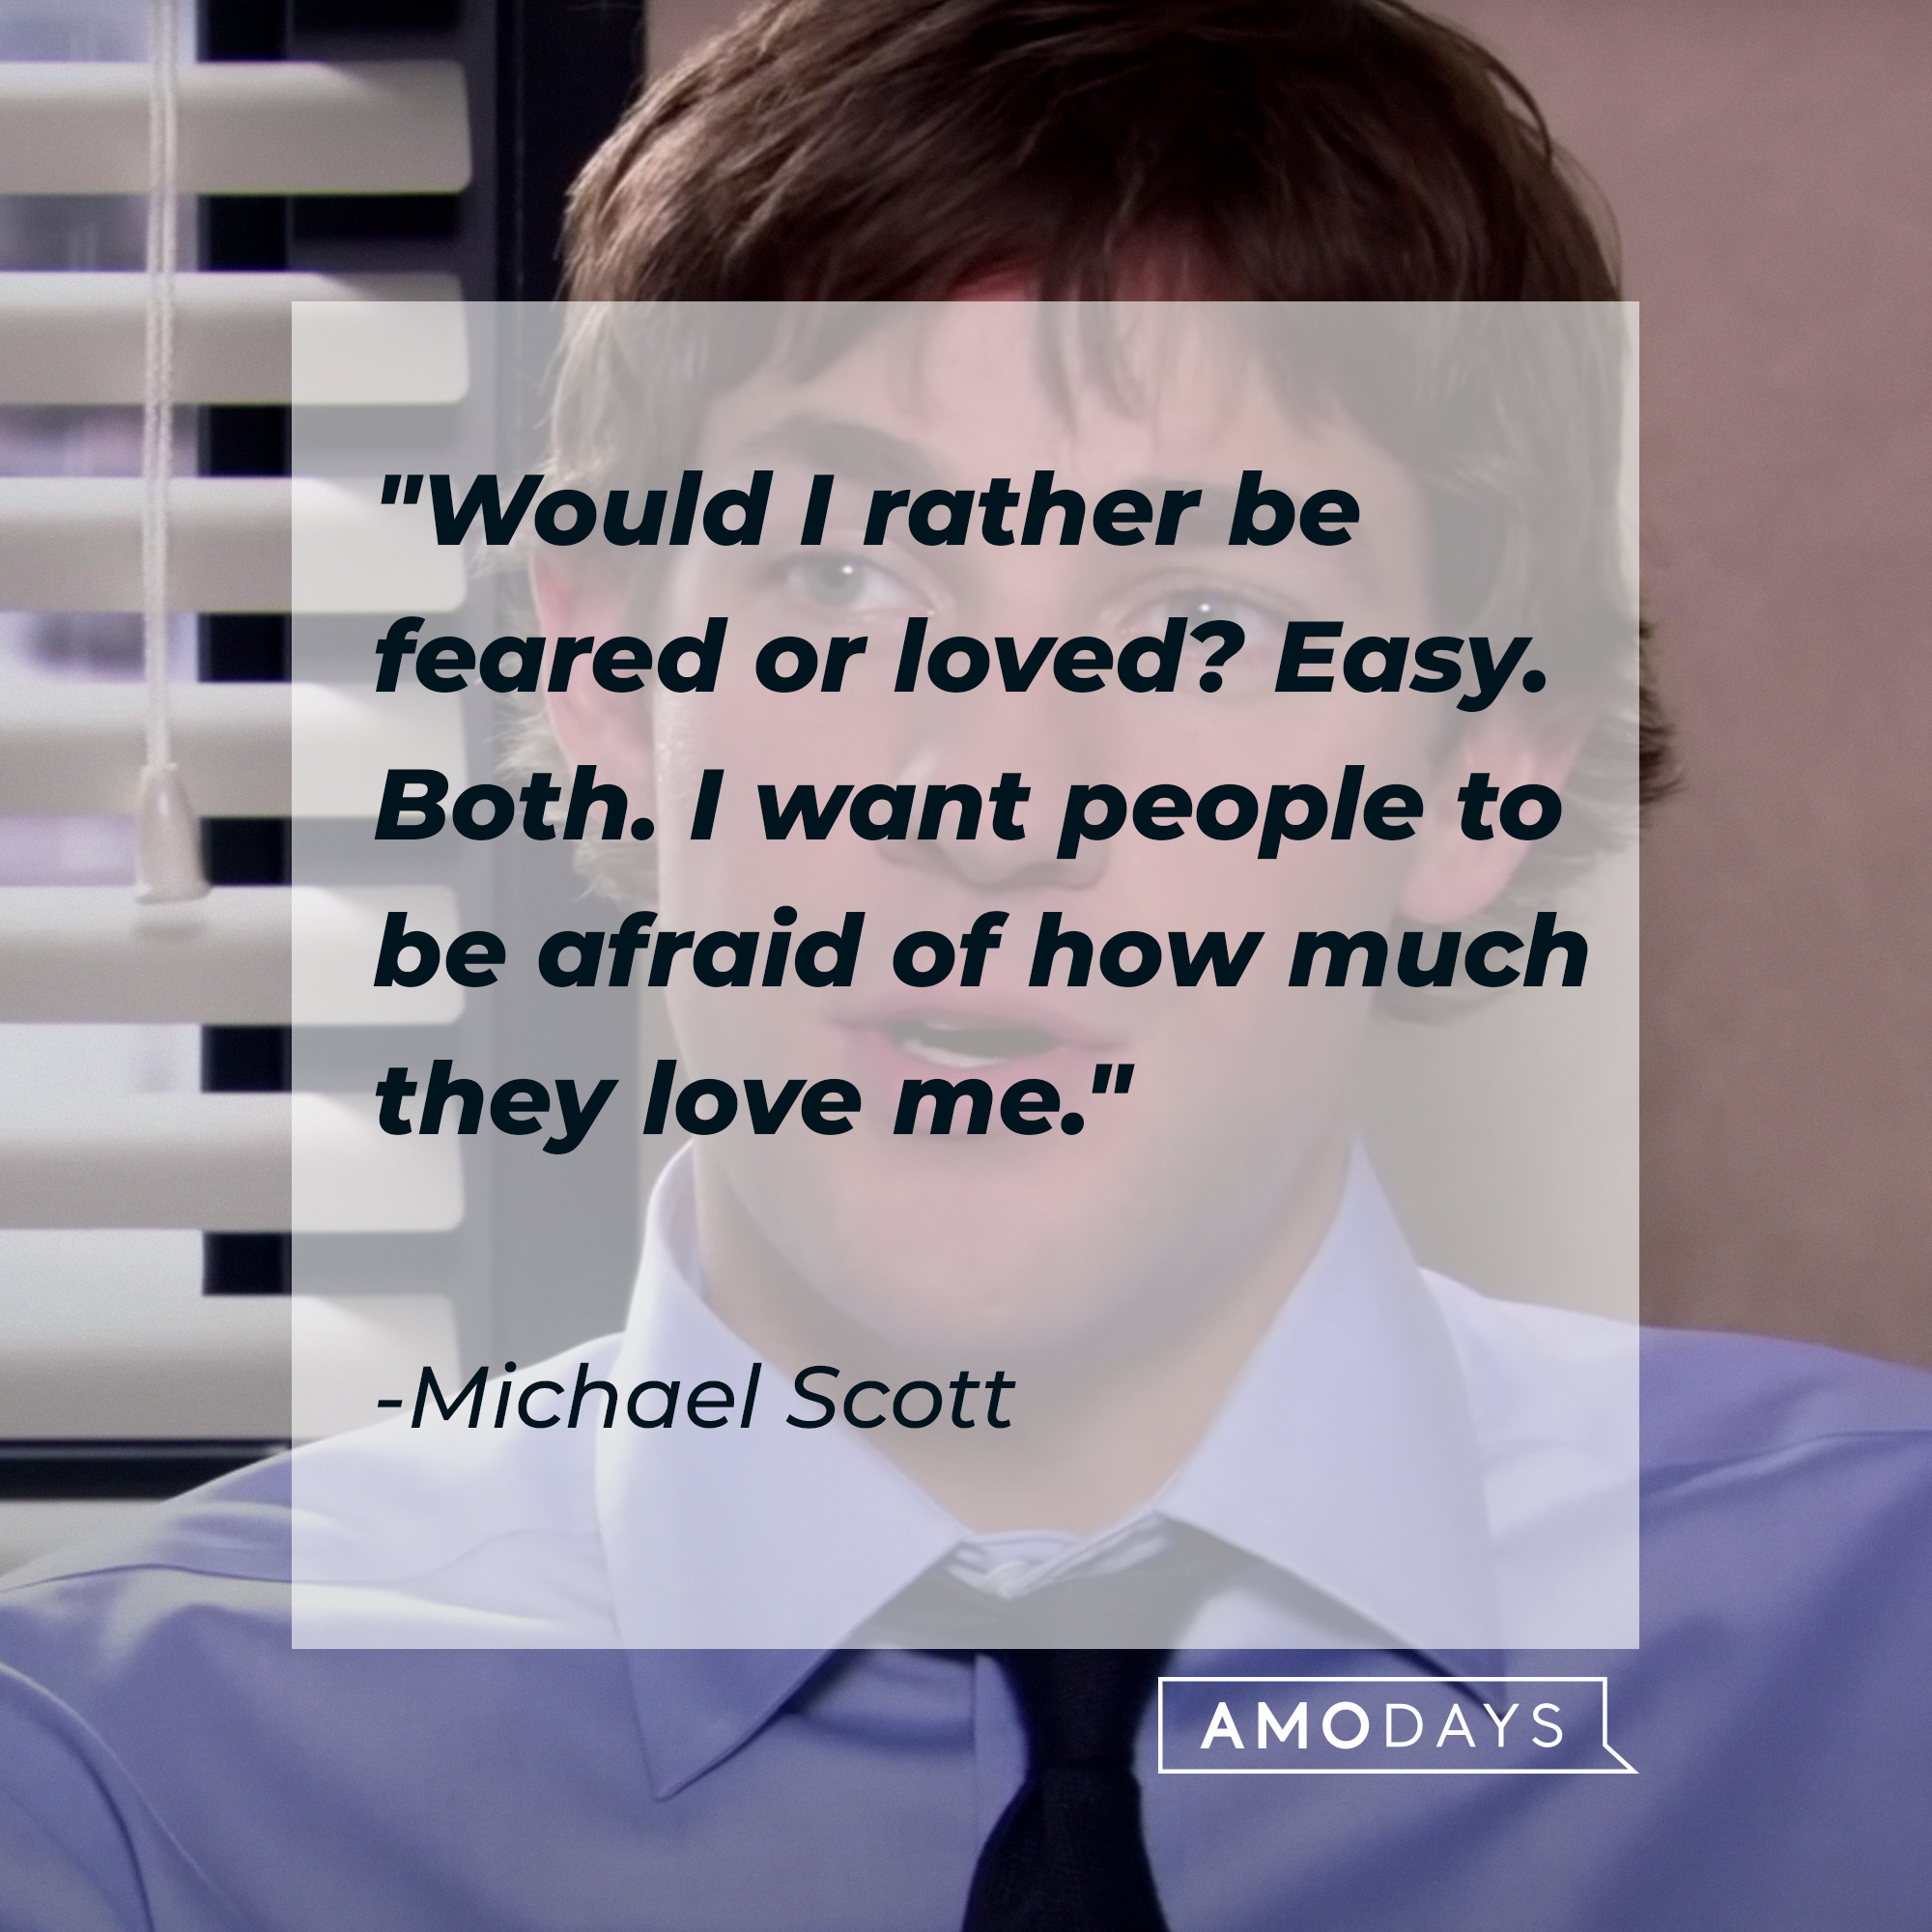 Michael Scott's quote: "Would I rather be feared or loved? Easy. Both. I want people to be afraid of how much they love me" | Source: Youtube.com/TheOffice